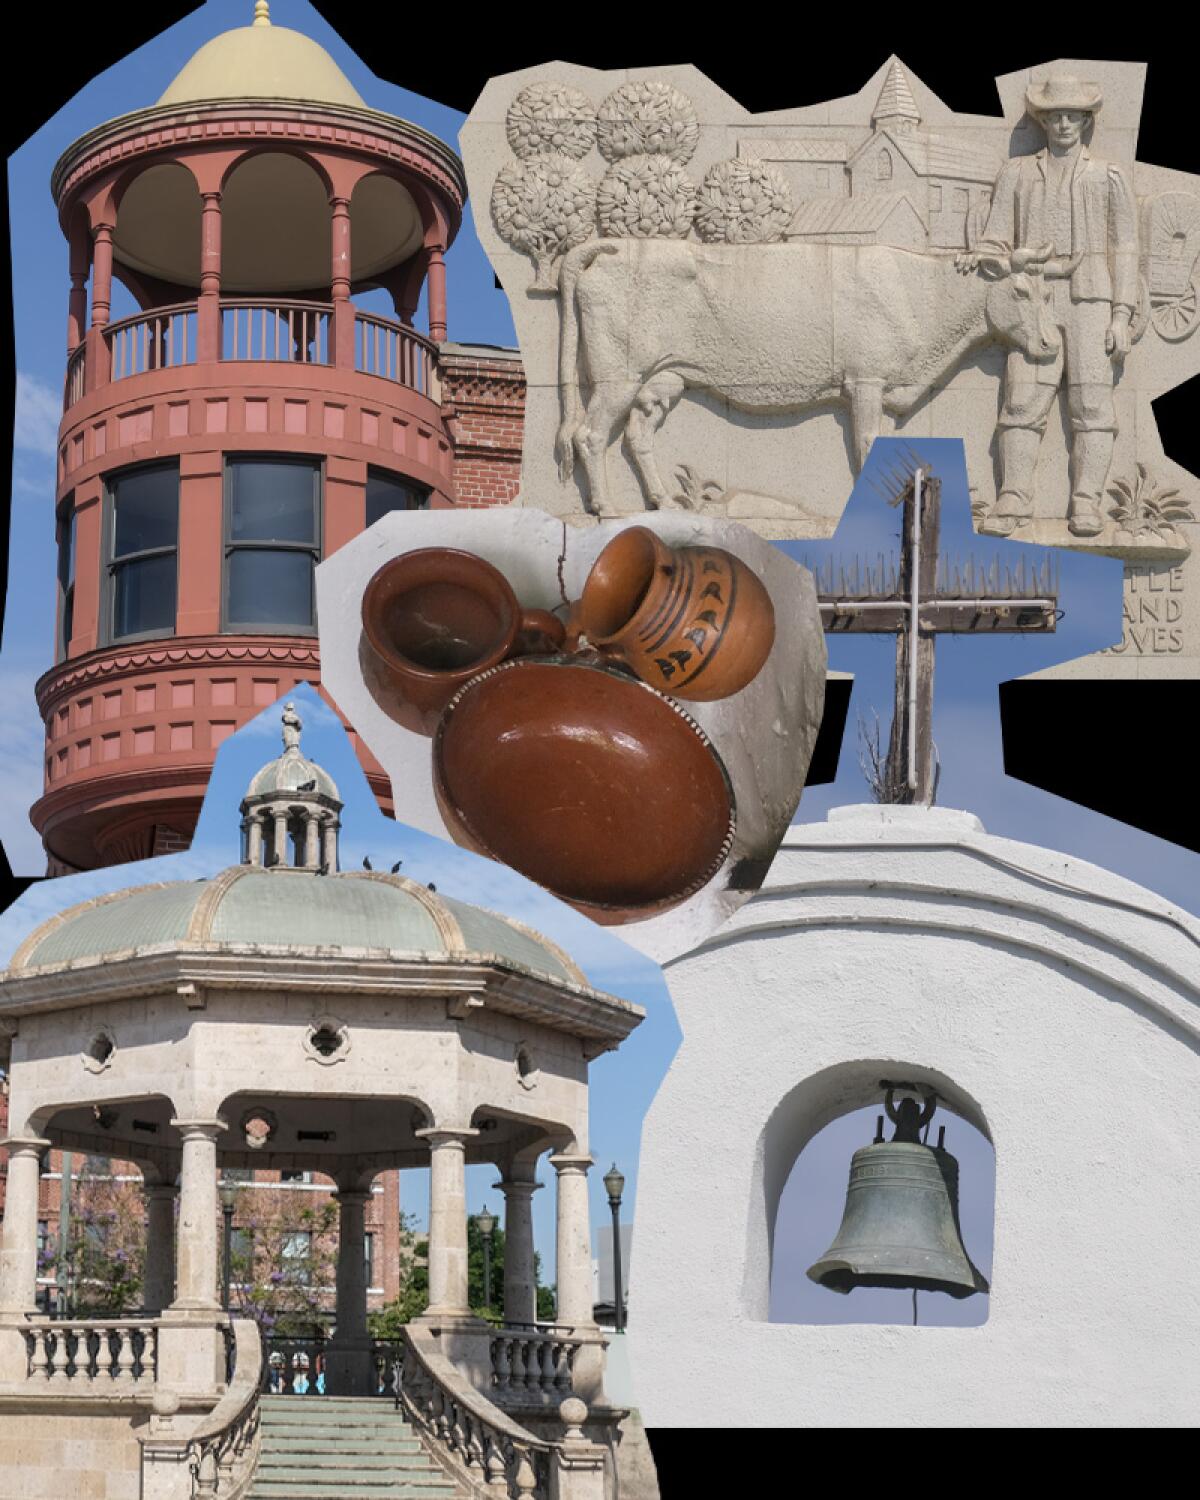 A photo collage of places to discover Mexican history in Los Angeles.